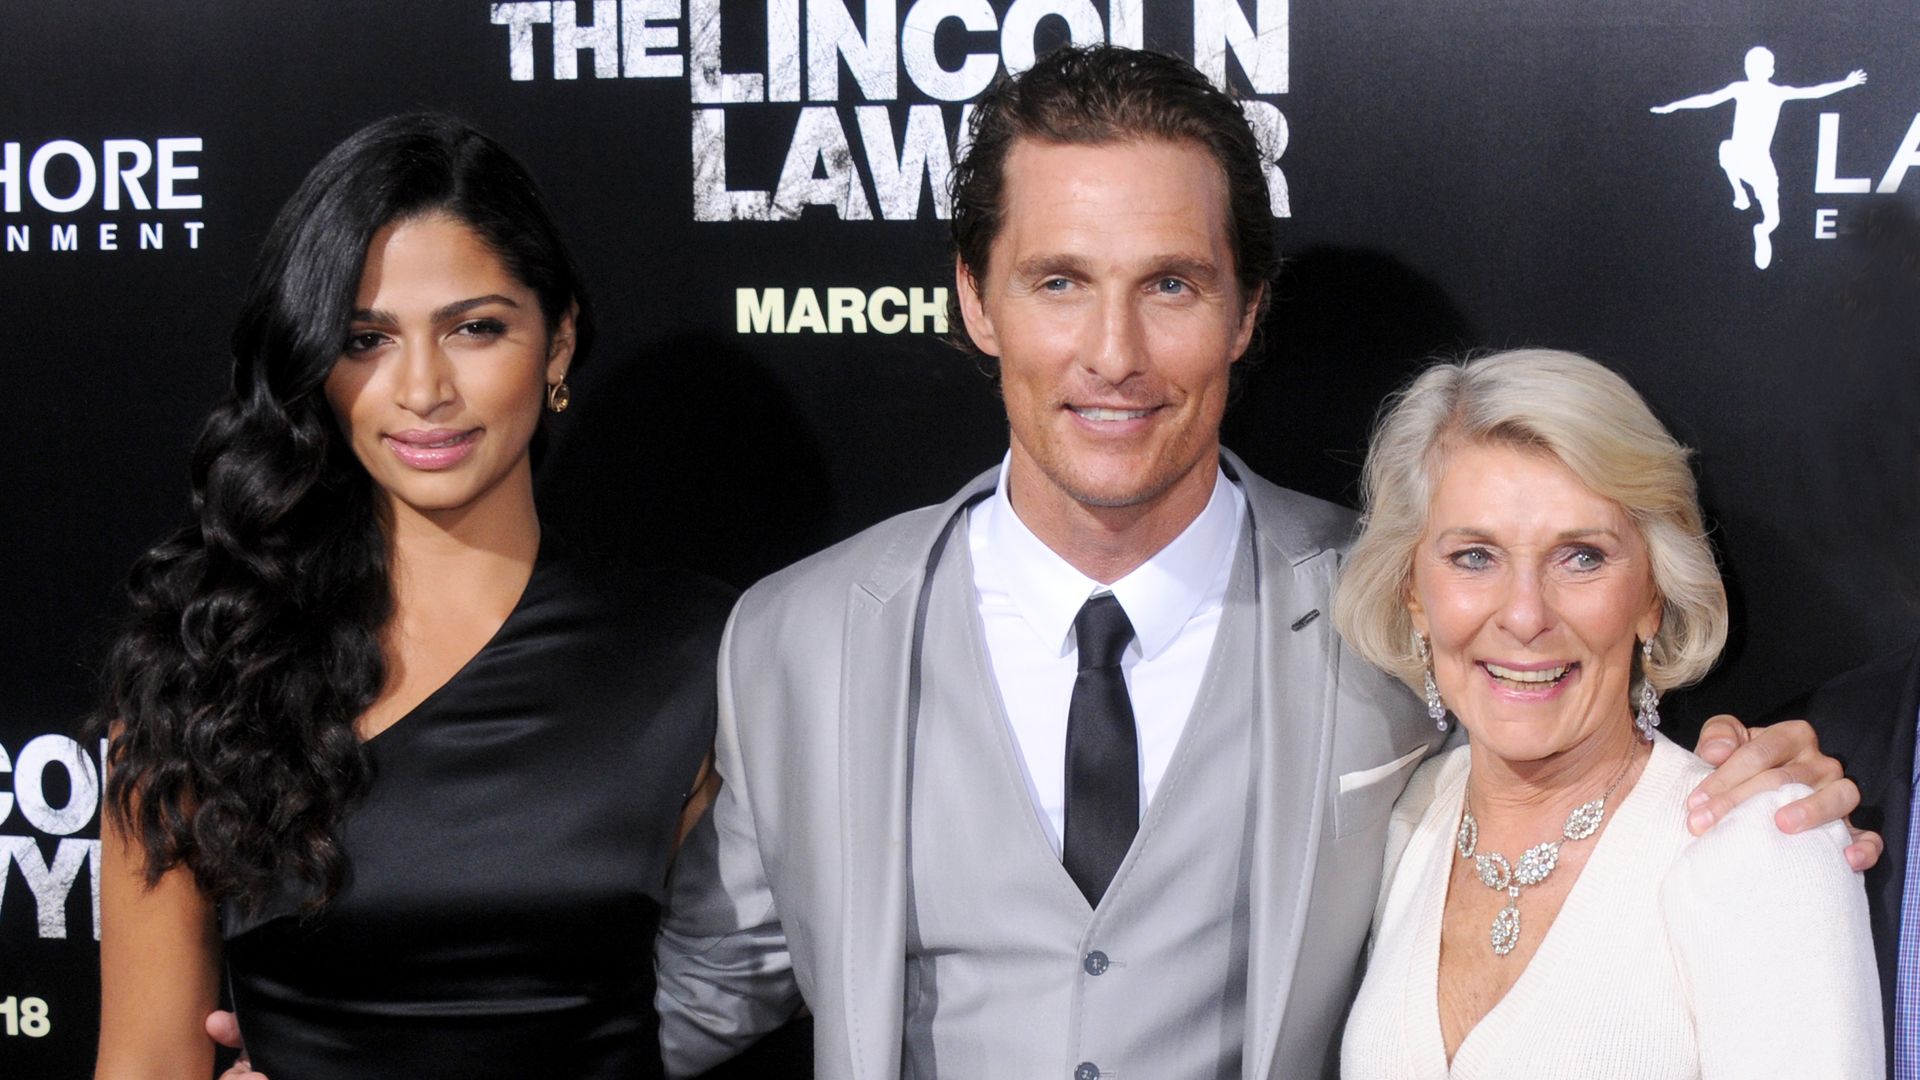 Camila Alves, Matthew McConaughey and mom Mary Kathleen McCabe arrive at the Los Angeles Premiere of "The Lincoln Lawyer" on March 10, 2011 in Hollywood, California